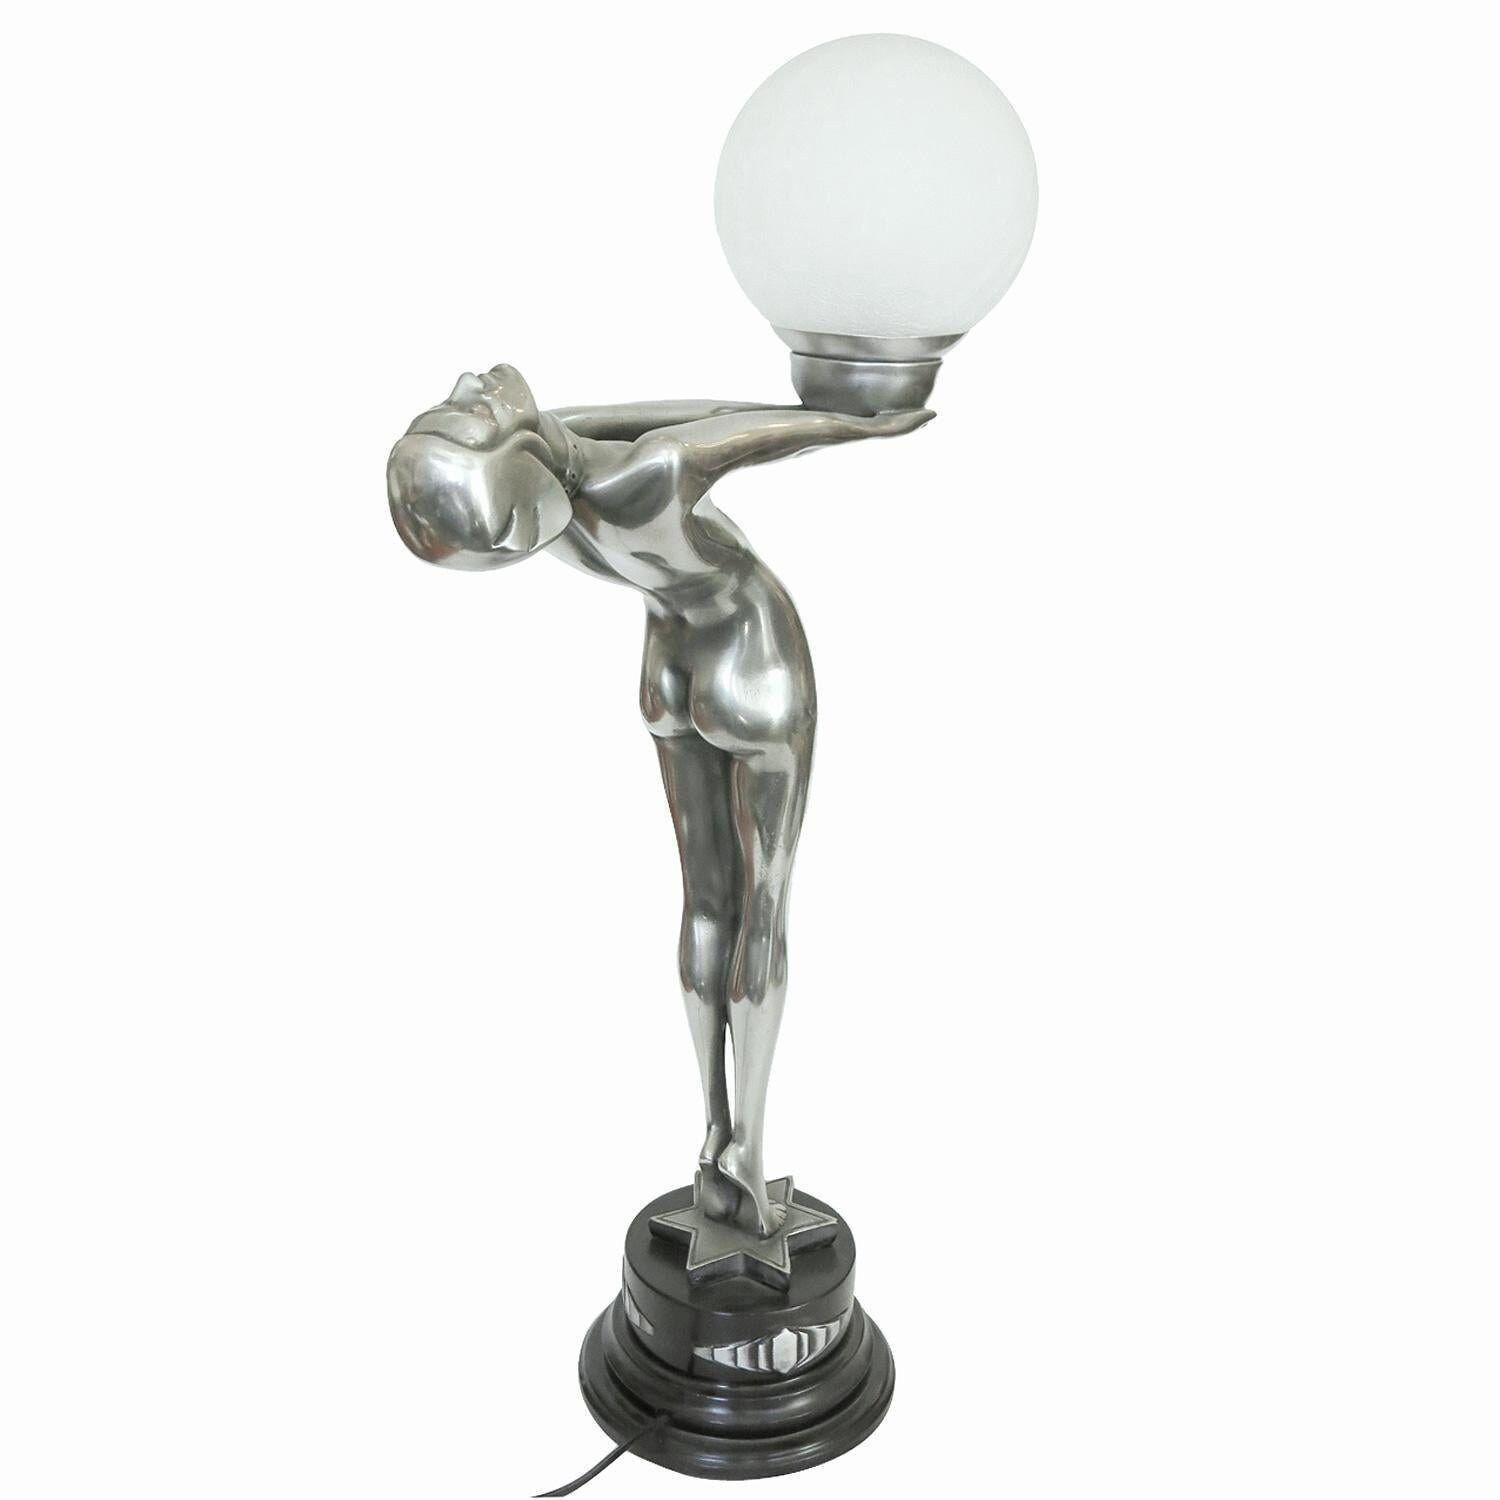 Silver Art Deco style nude Biba lamp on a stepped base fashioned after 